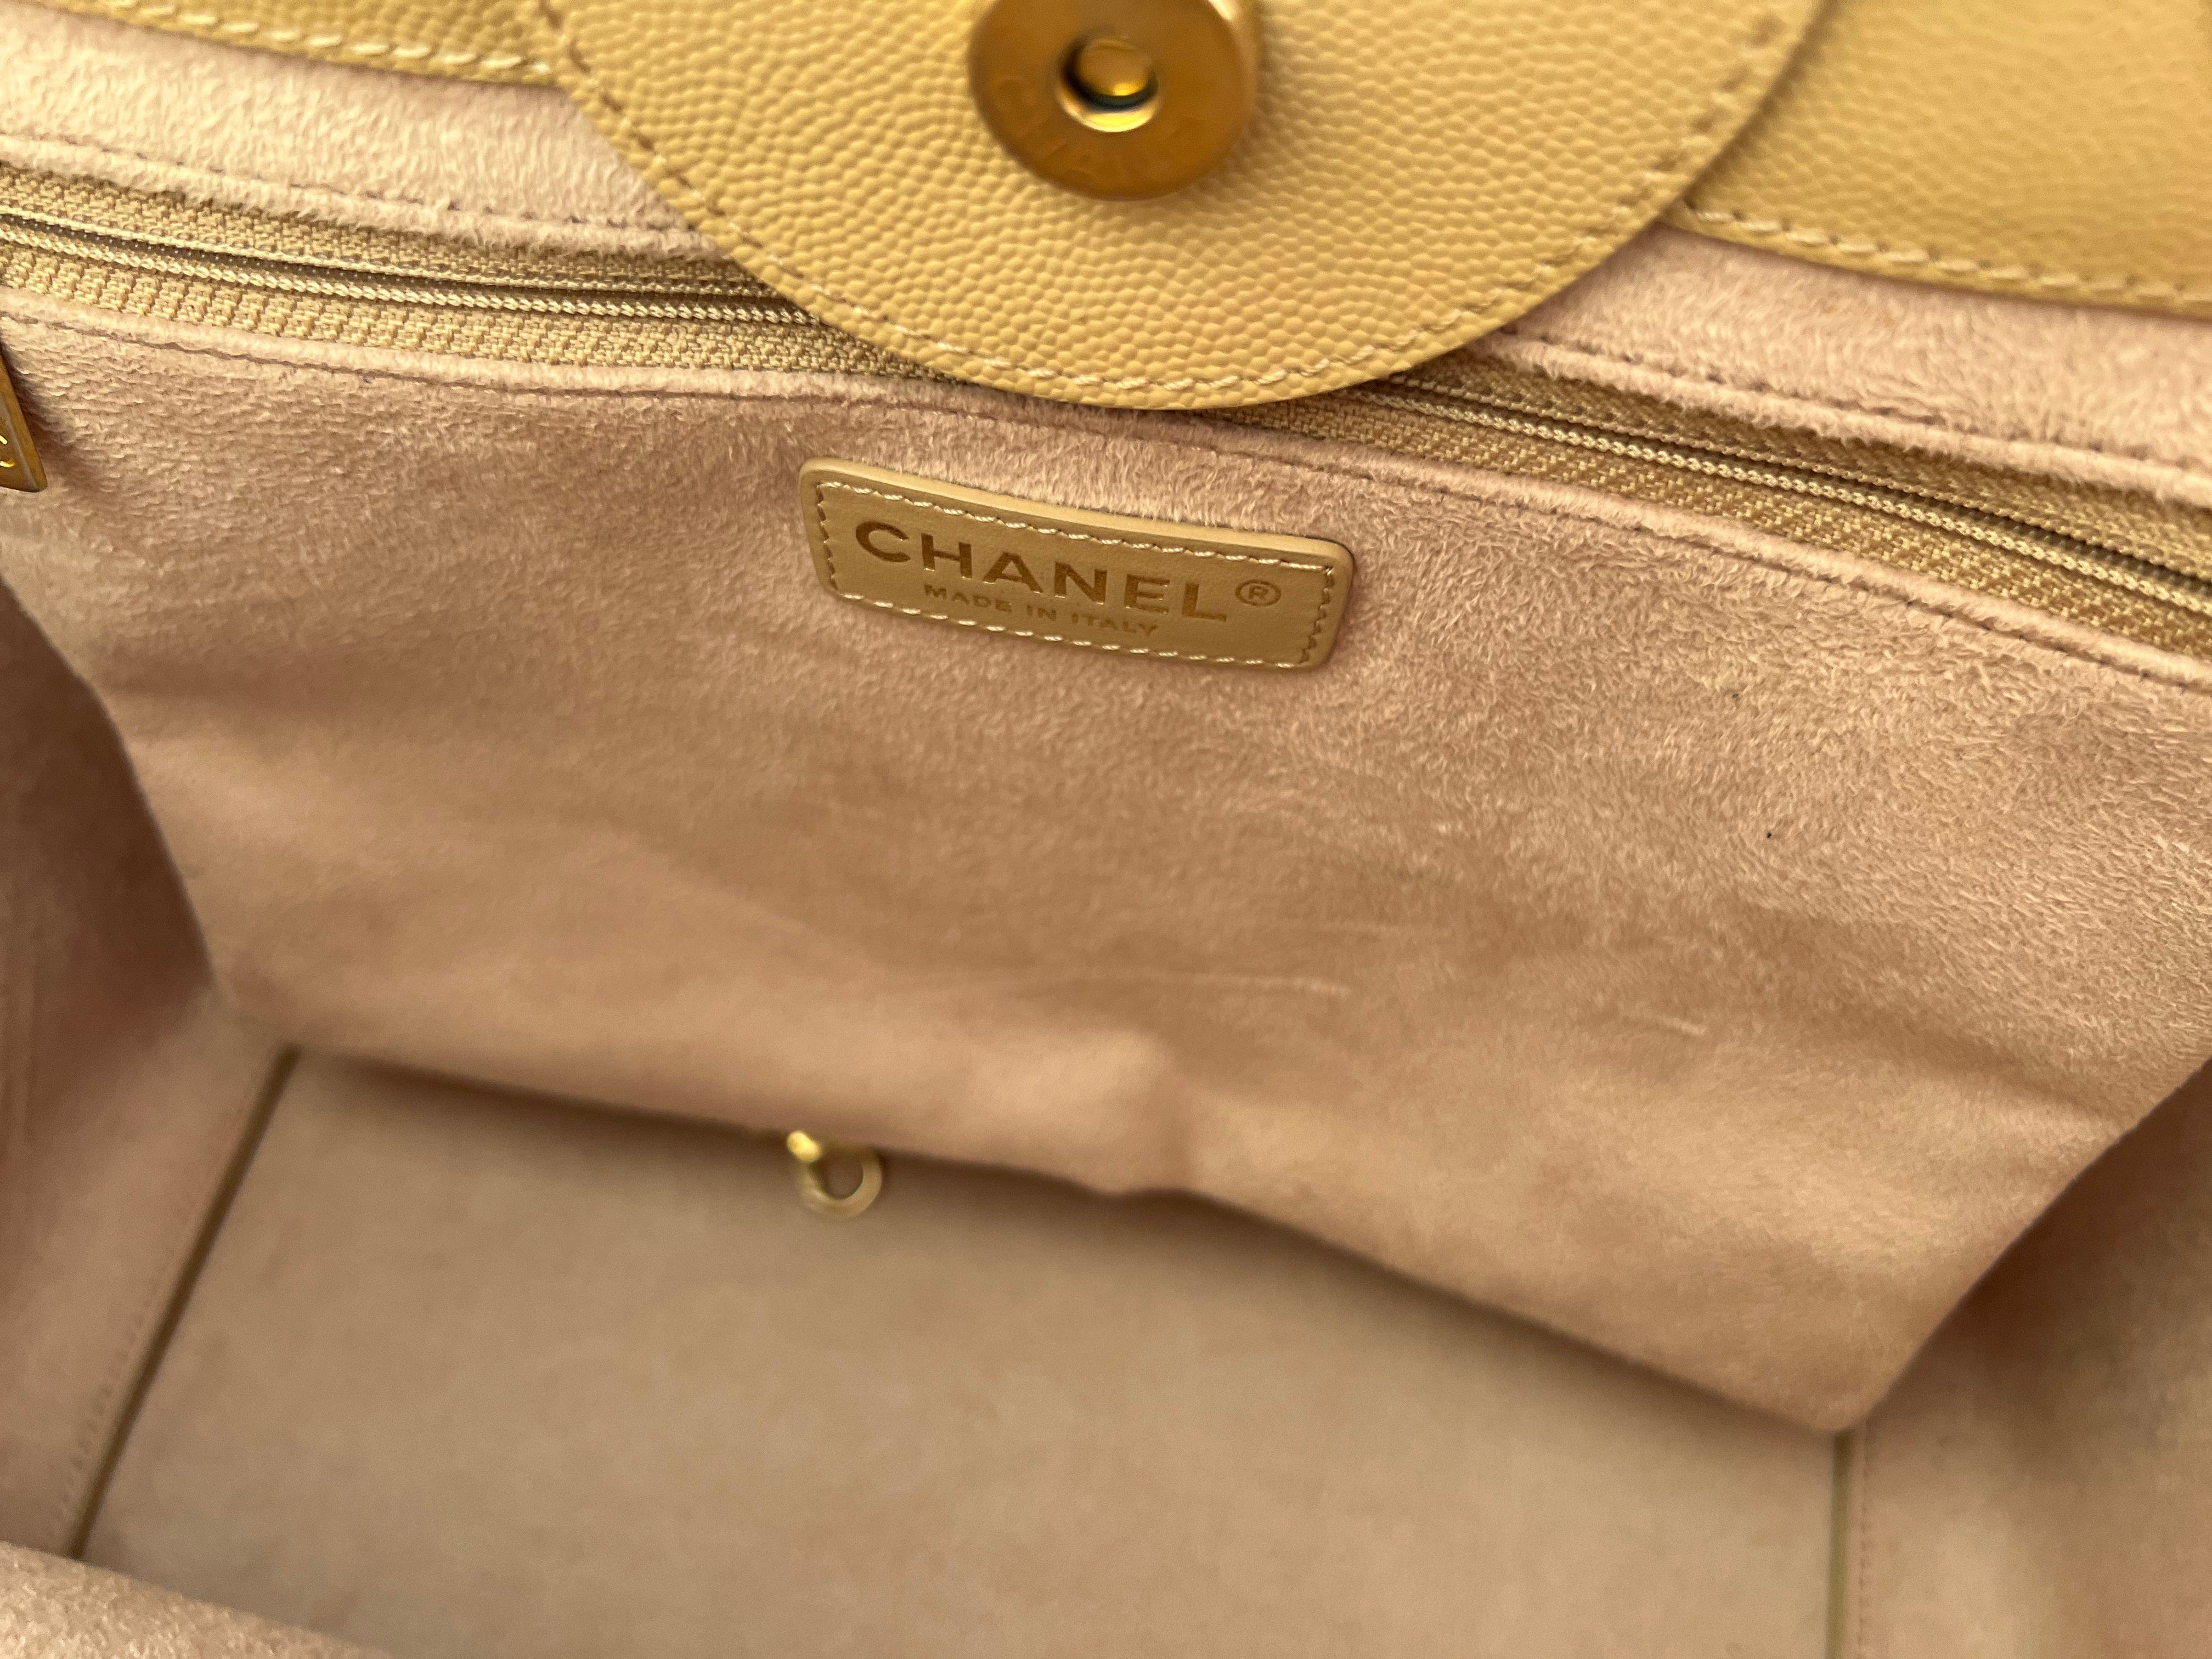 CHANEL Tote CHANEL LIGHT BEIGE MEDIUM DEAUVILLE SHOPPING TOTE STUDDED AGED HARDWARE - Redeluxe